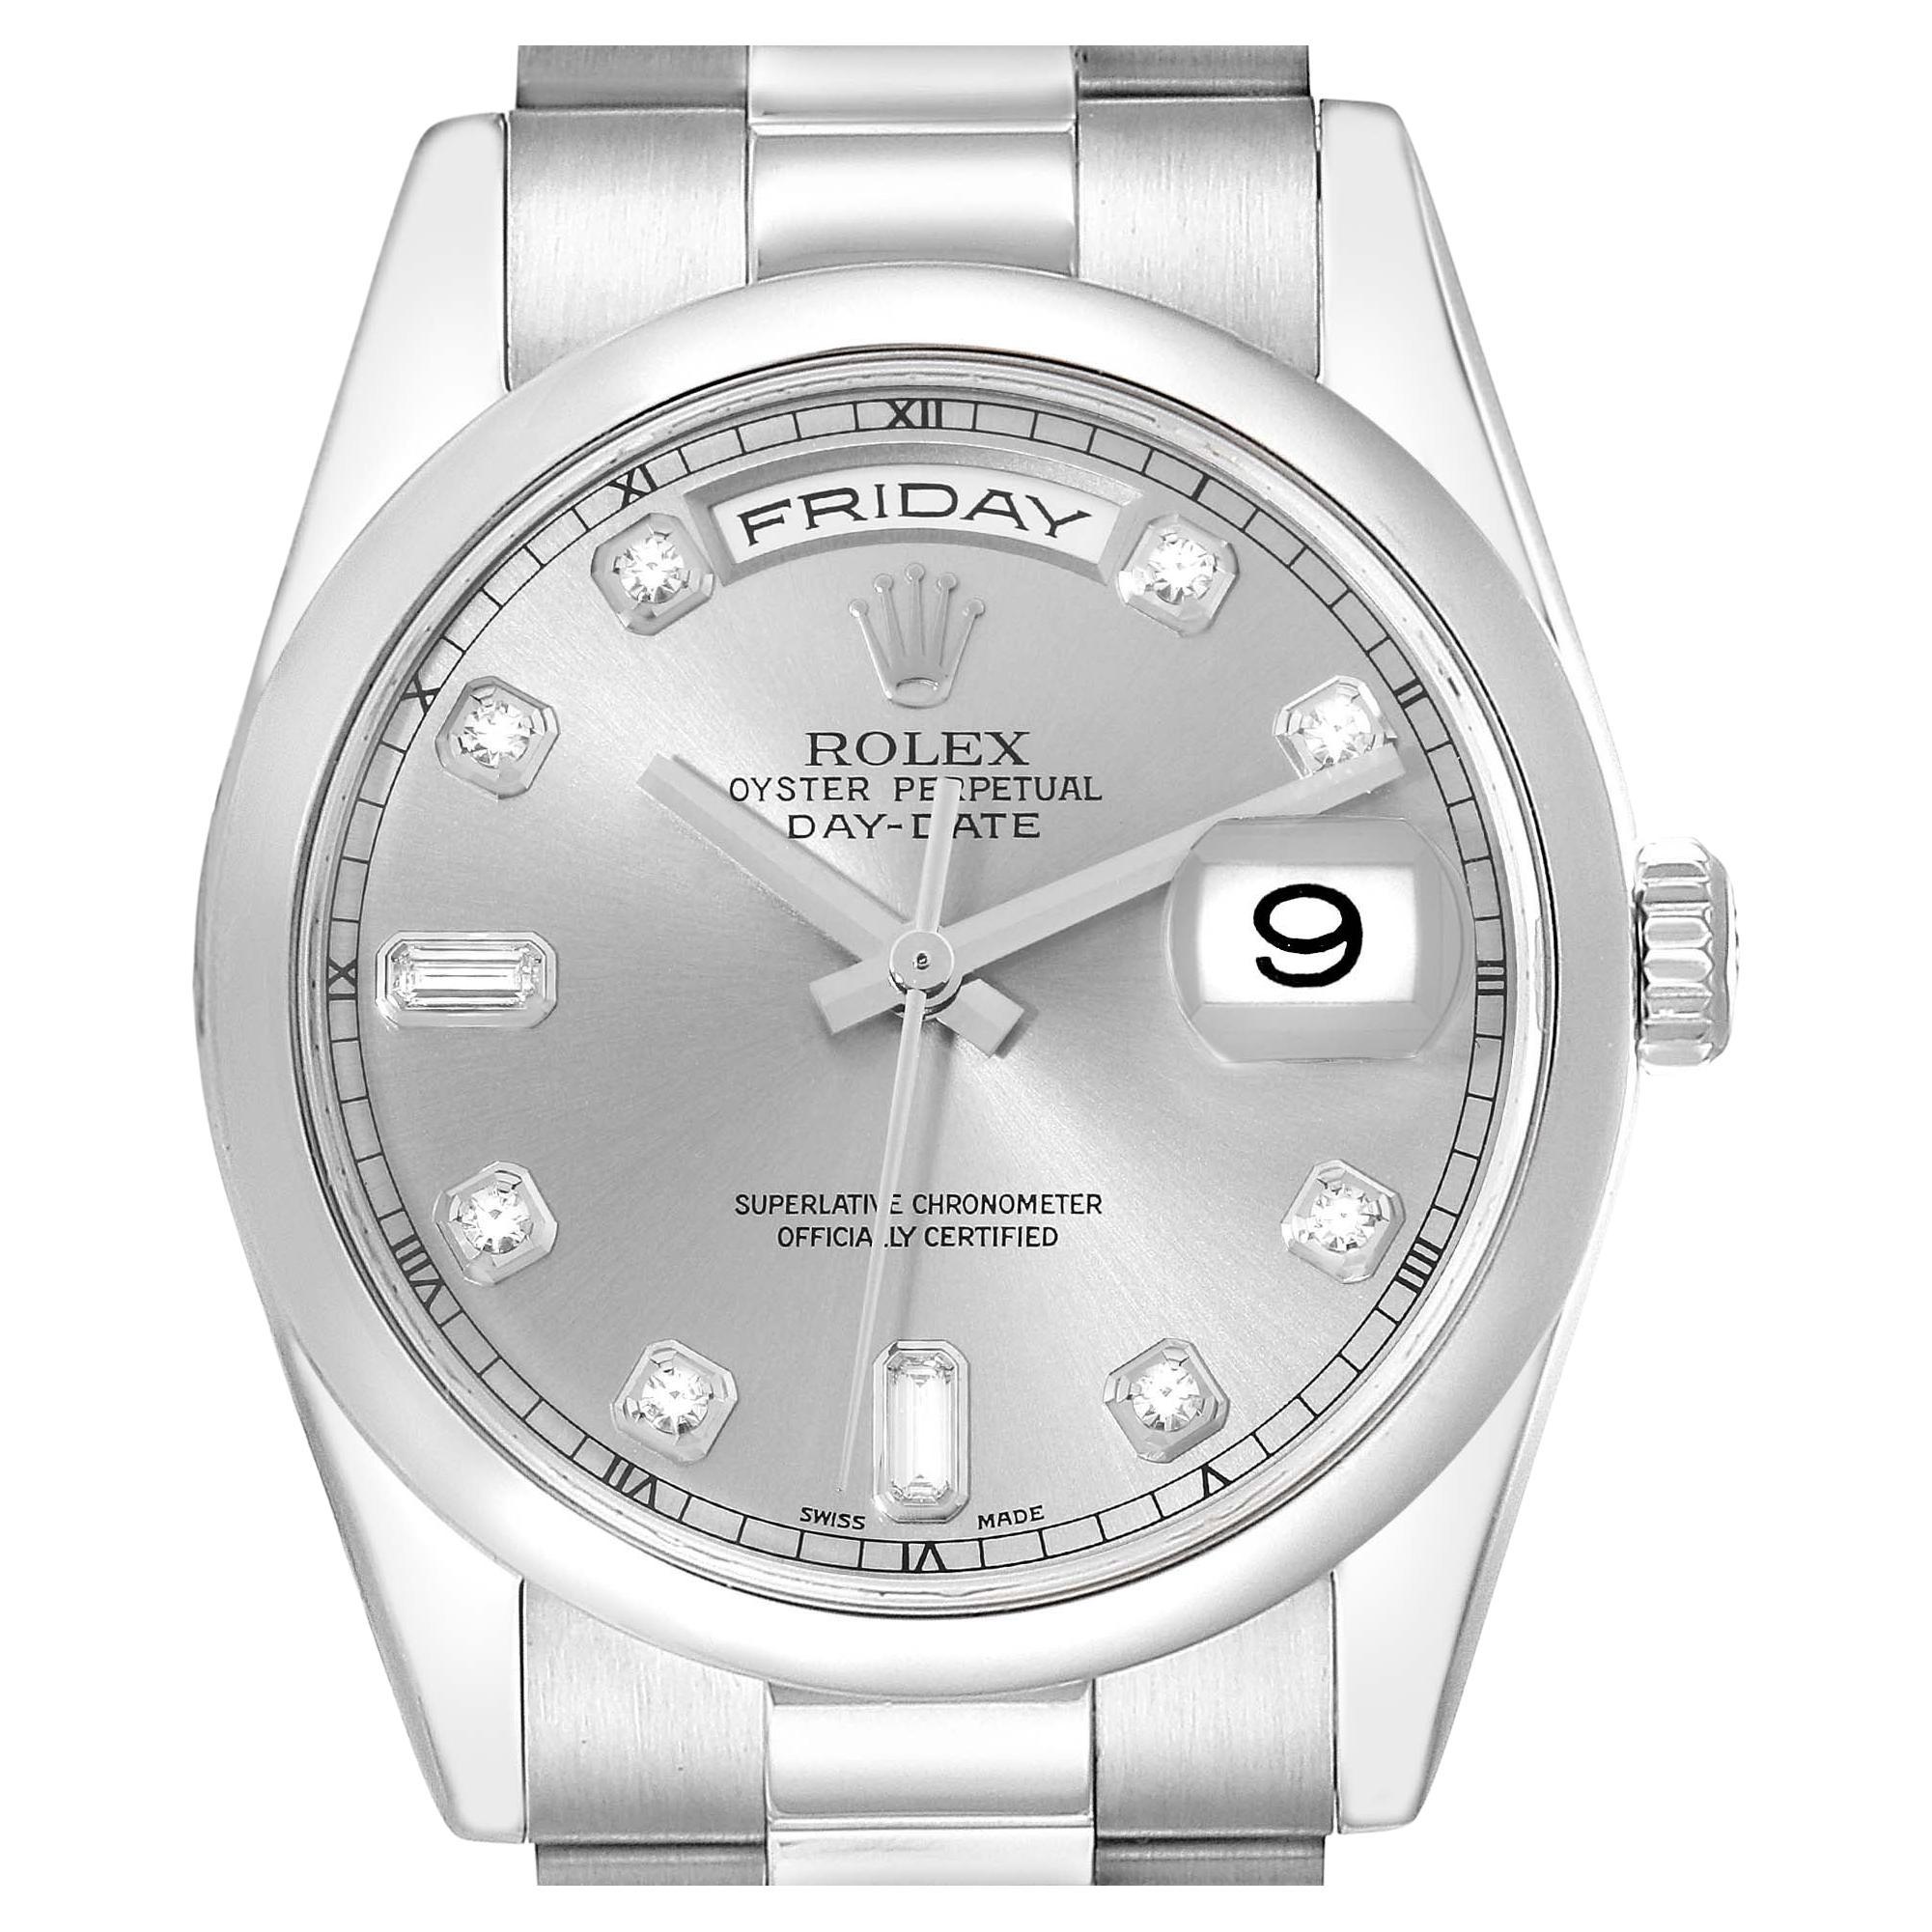 Rolex Day-Date President Diamond Dial Platinum Mens Watch 118206 Box Card For Sale